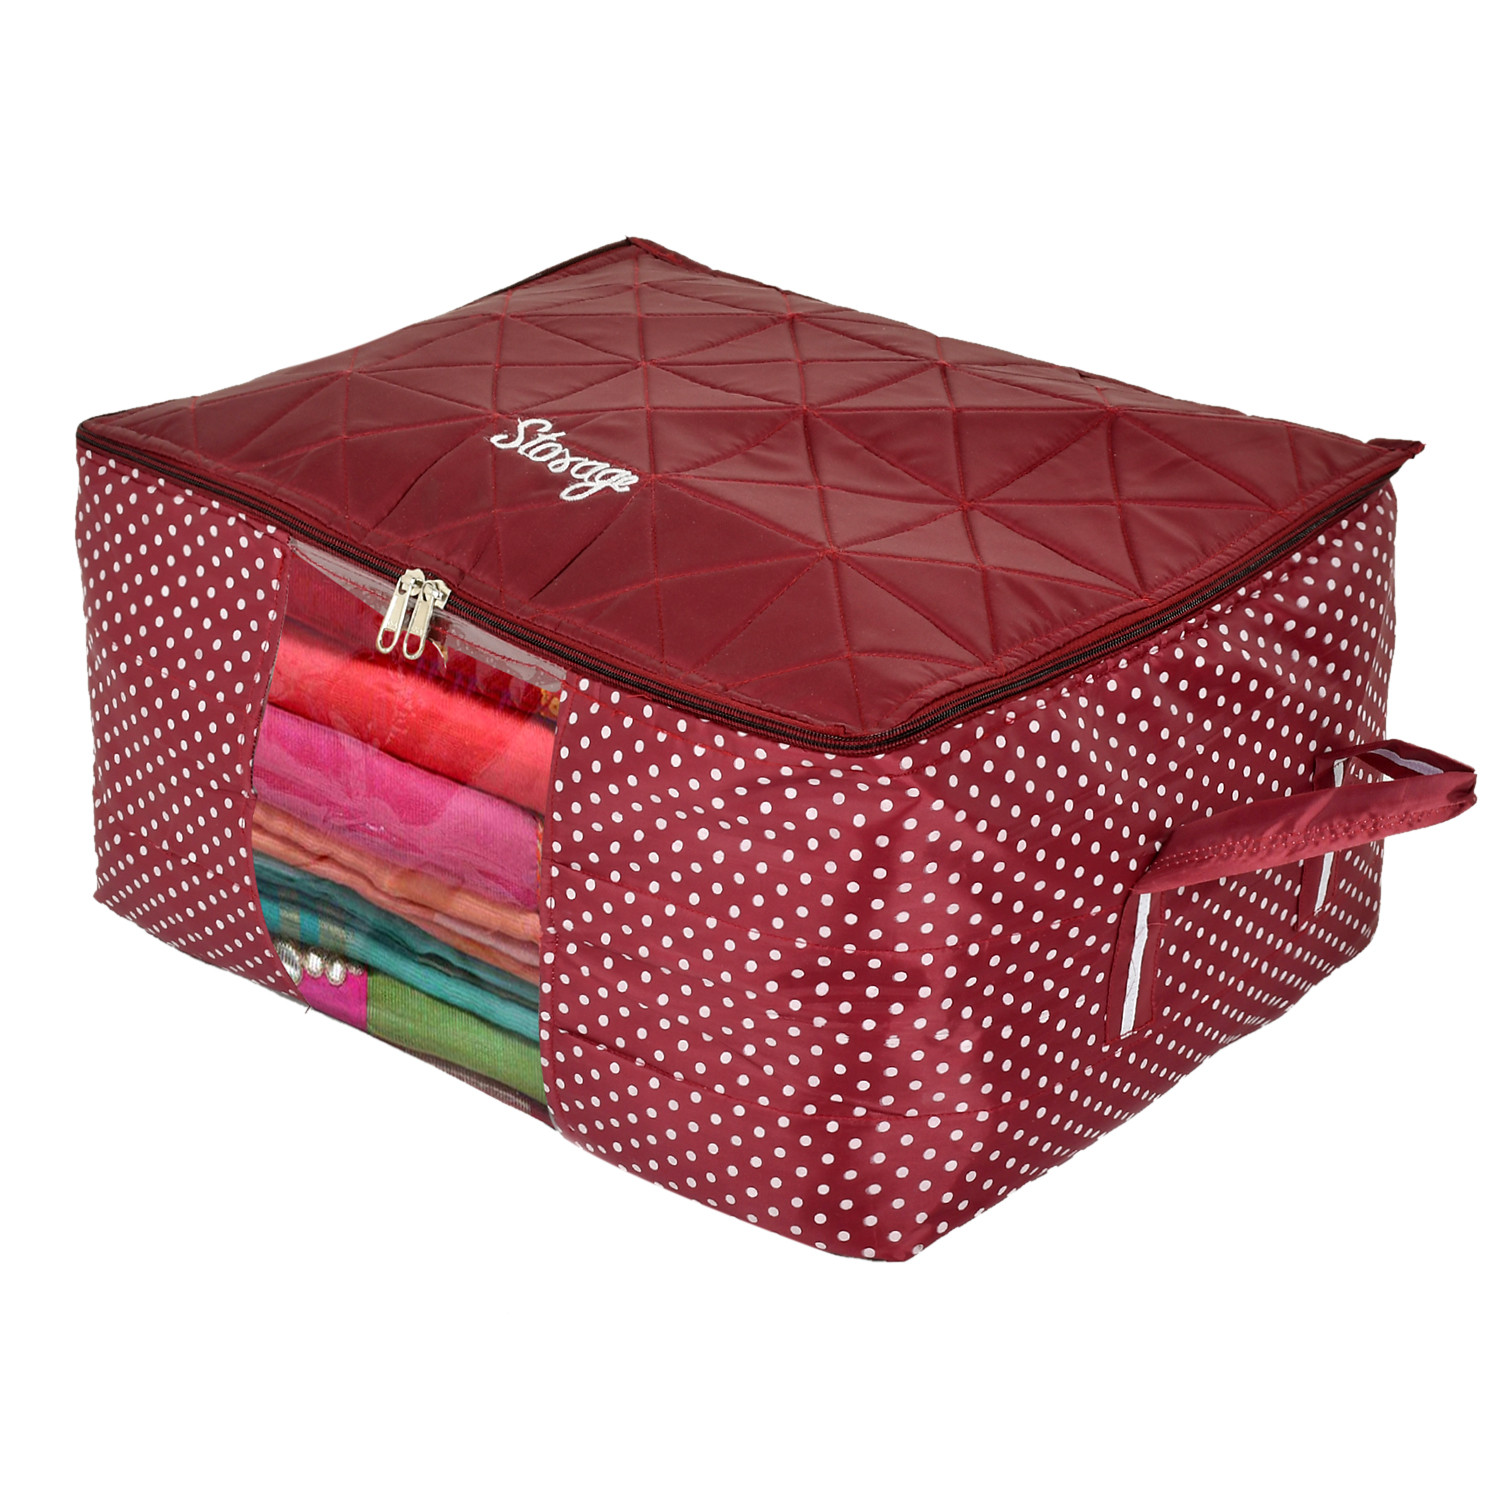 Kuber Industries Polka Dot Print Polyester Foldable Saree Cover|Clothes For Home & Traveling With Transparent, Extra Large (Maroon)